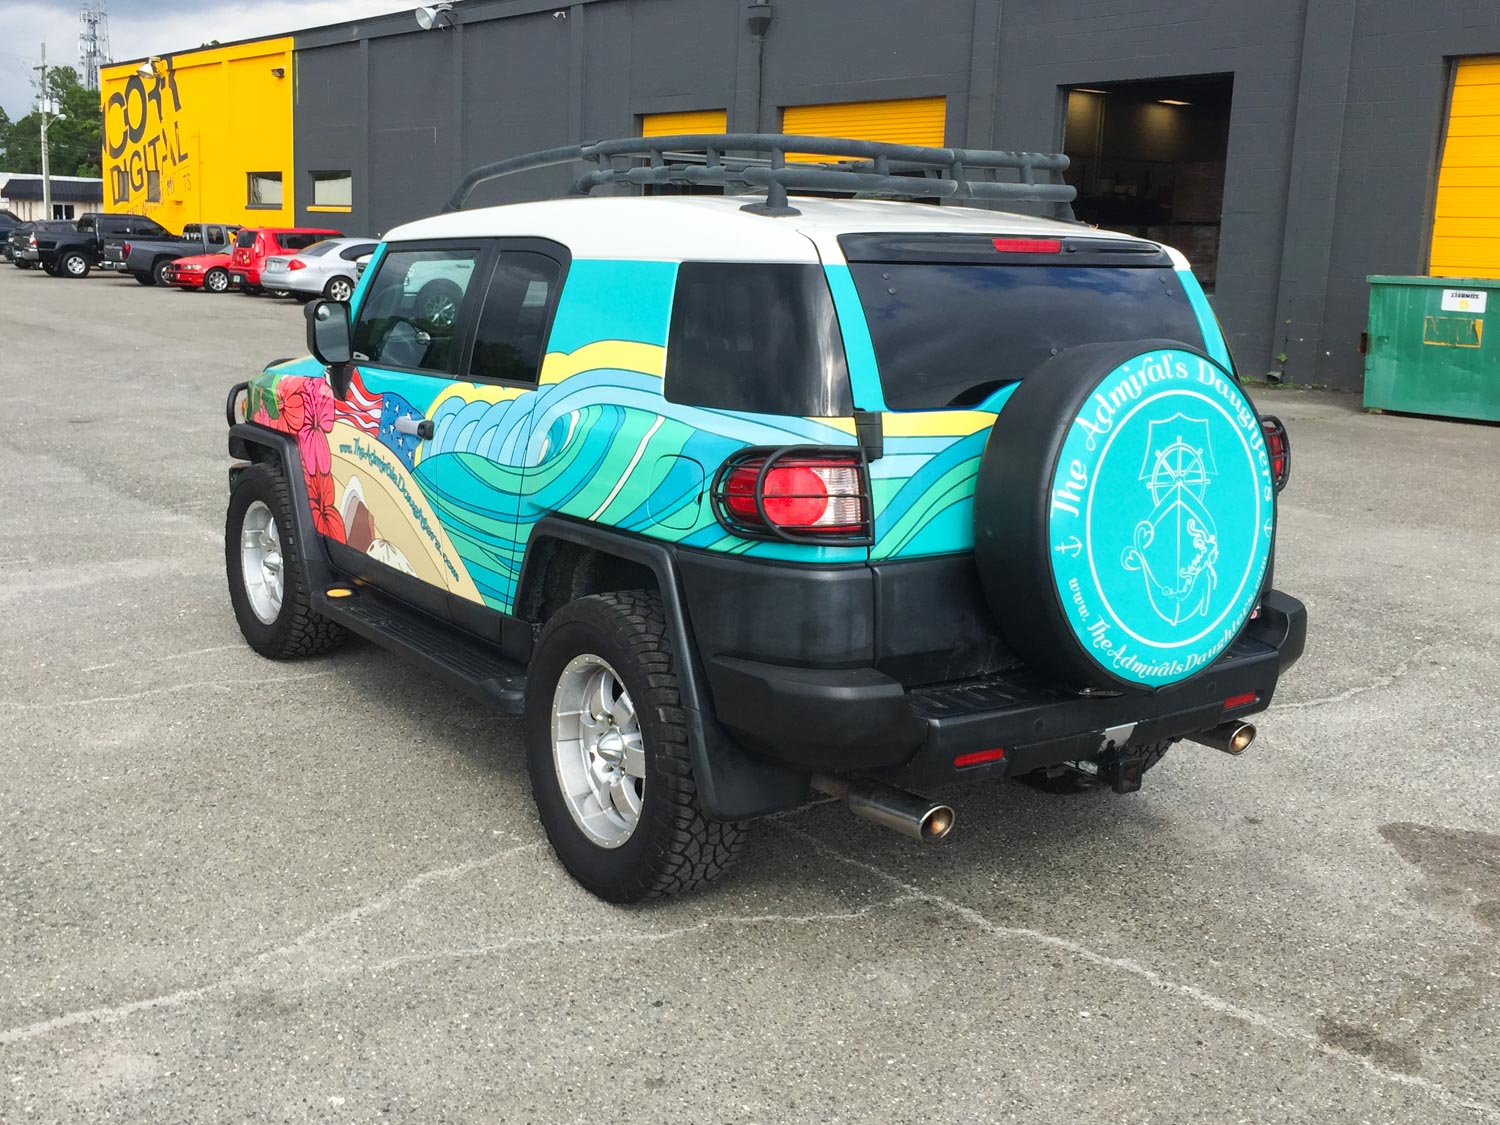 The Admirals Daughter Vehicle Wrap